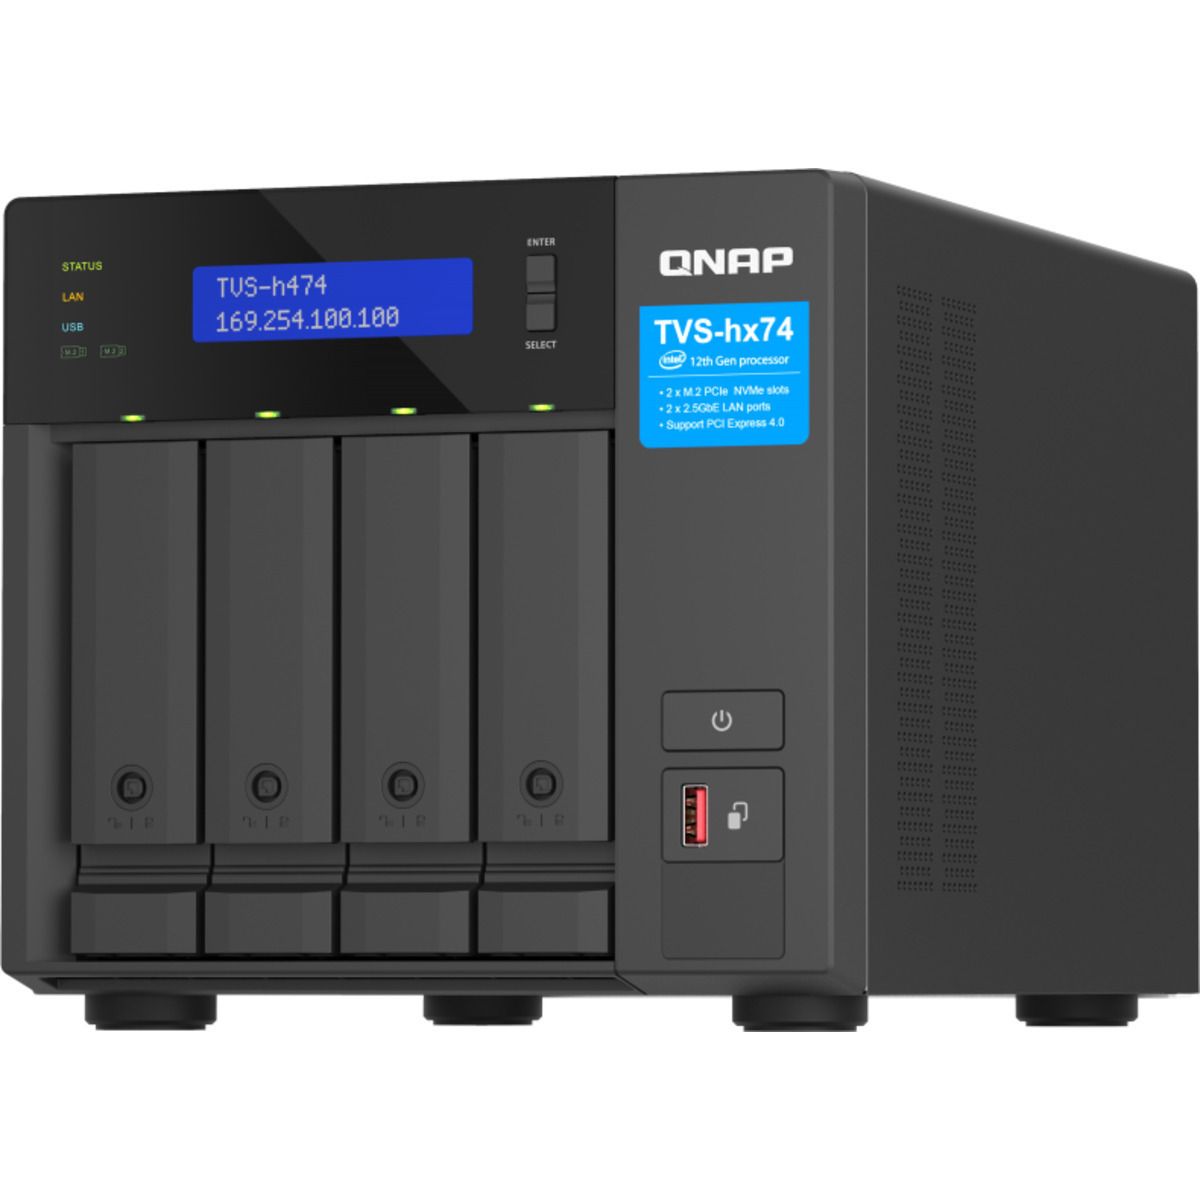 QNAP TVS-h474 Pentium Gold 2tb 4-Bay Desktop Multimedia / Power User / Business NAS - Network Attached Storage Device 4x500gb Sandisk Ultra 3D SDSSDH3-500G 2.5 560/520MB/s SATA 6Gb/s SSD CONSUMER Class Drives Installed - Burn-In Tested - FREE RAM UPGRADE TVS-h474 Pentium Gold